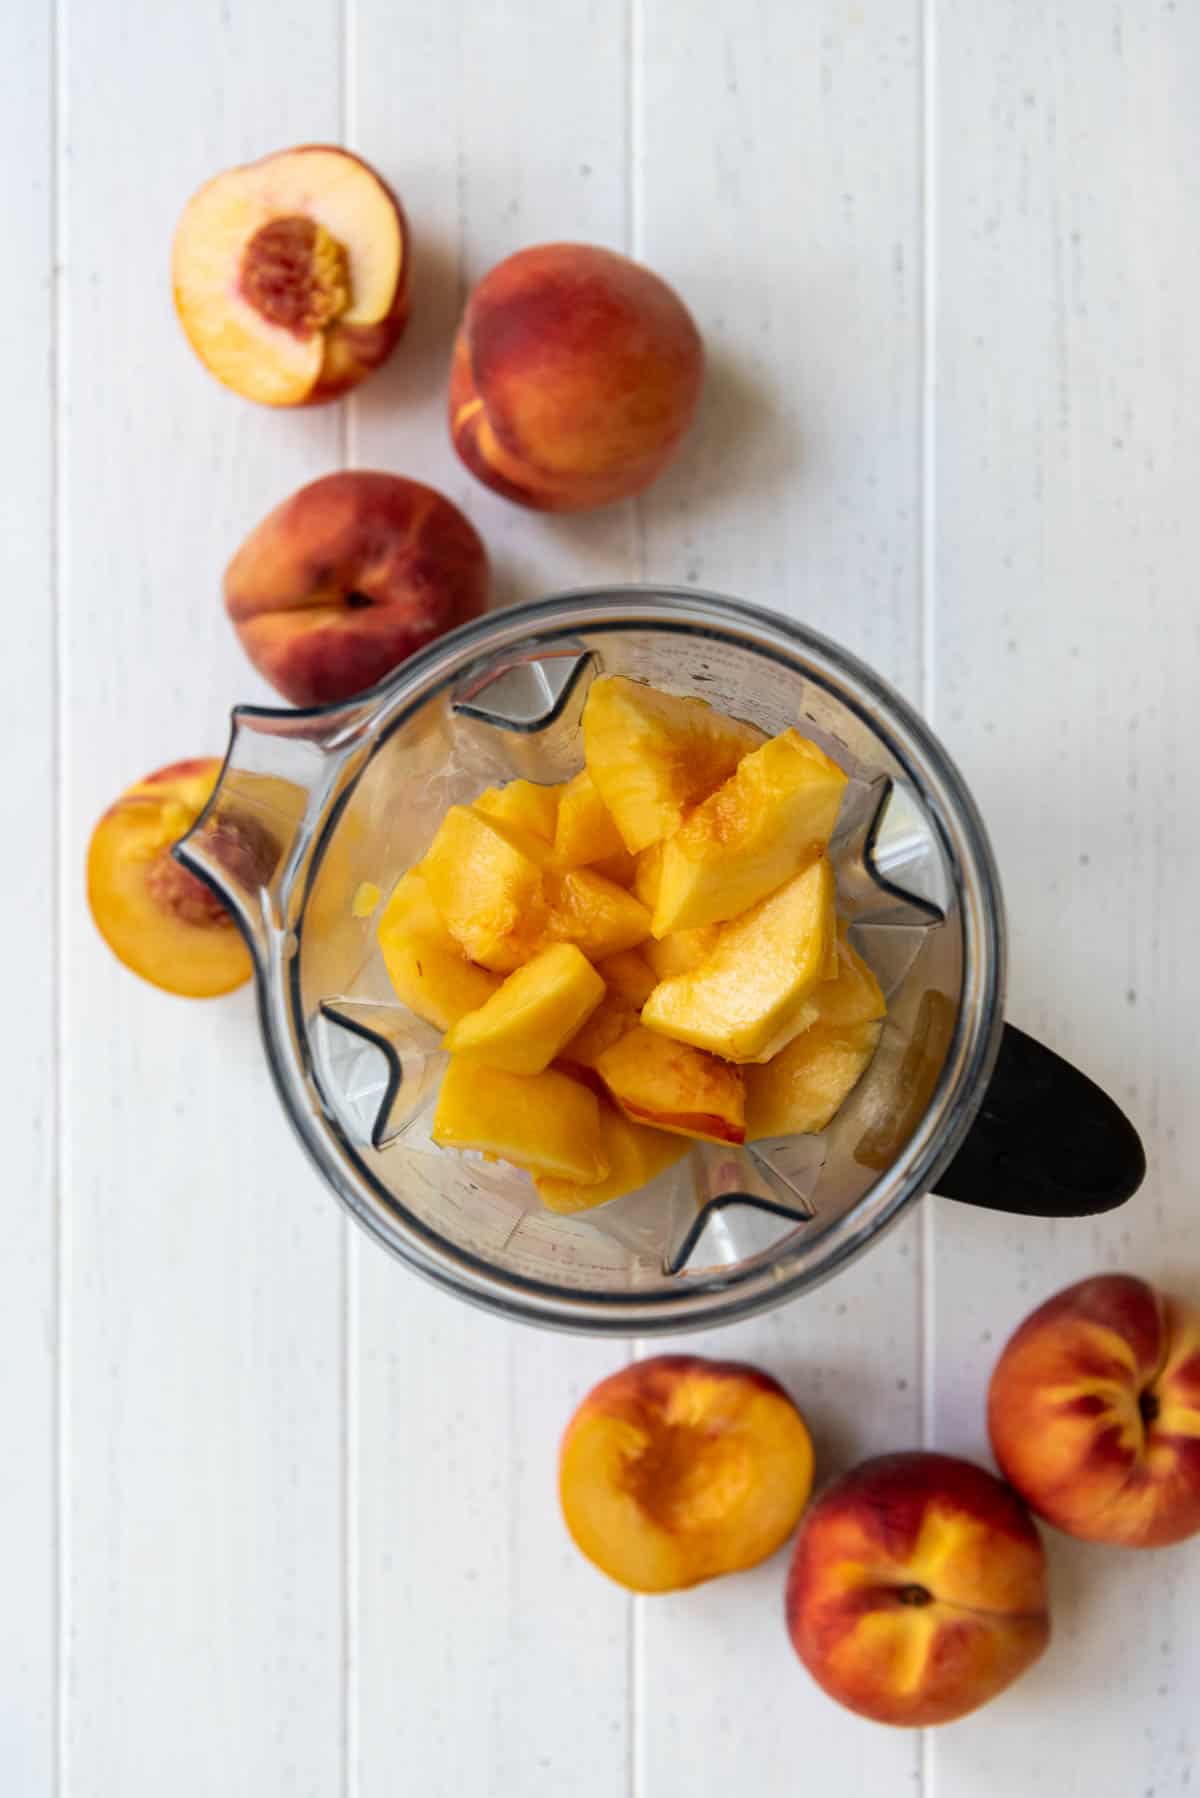 A blender pitcher full of ice cream and fresh sliced peaches.